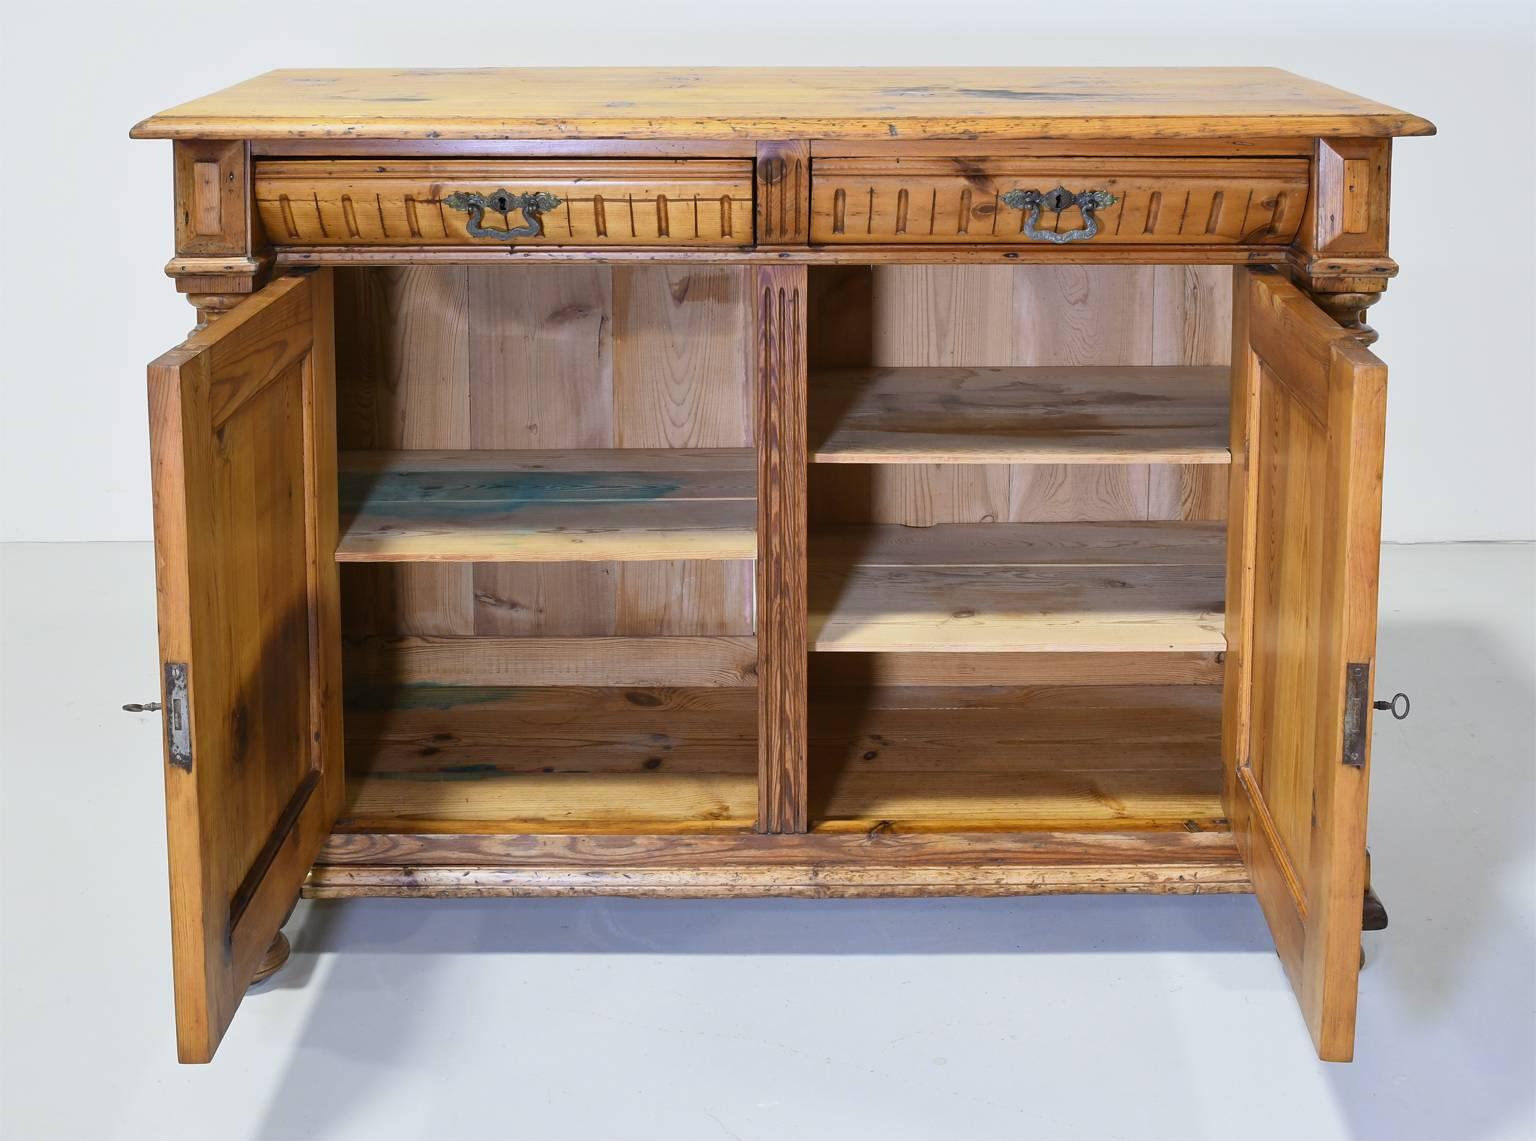 Rustic 19th Century Danish Sideboard or Buffet in Pine with Rope-Turned Columns